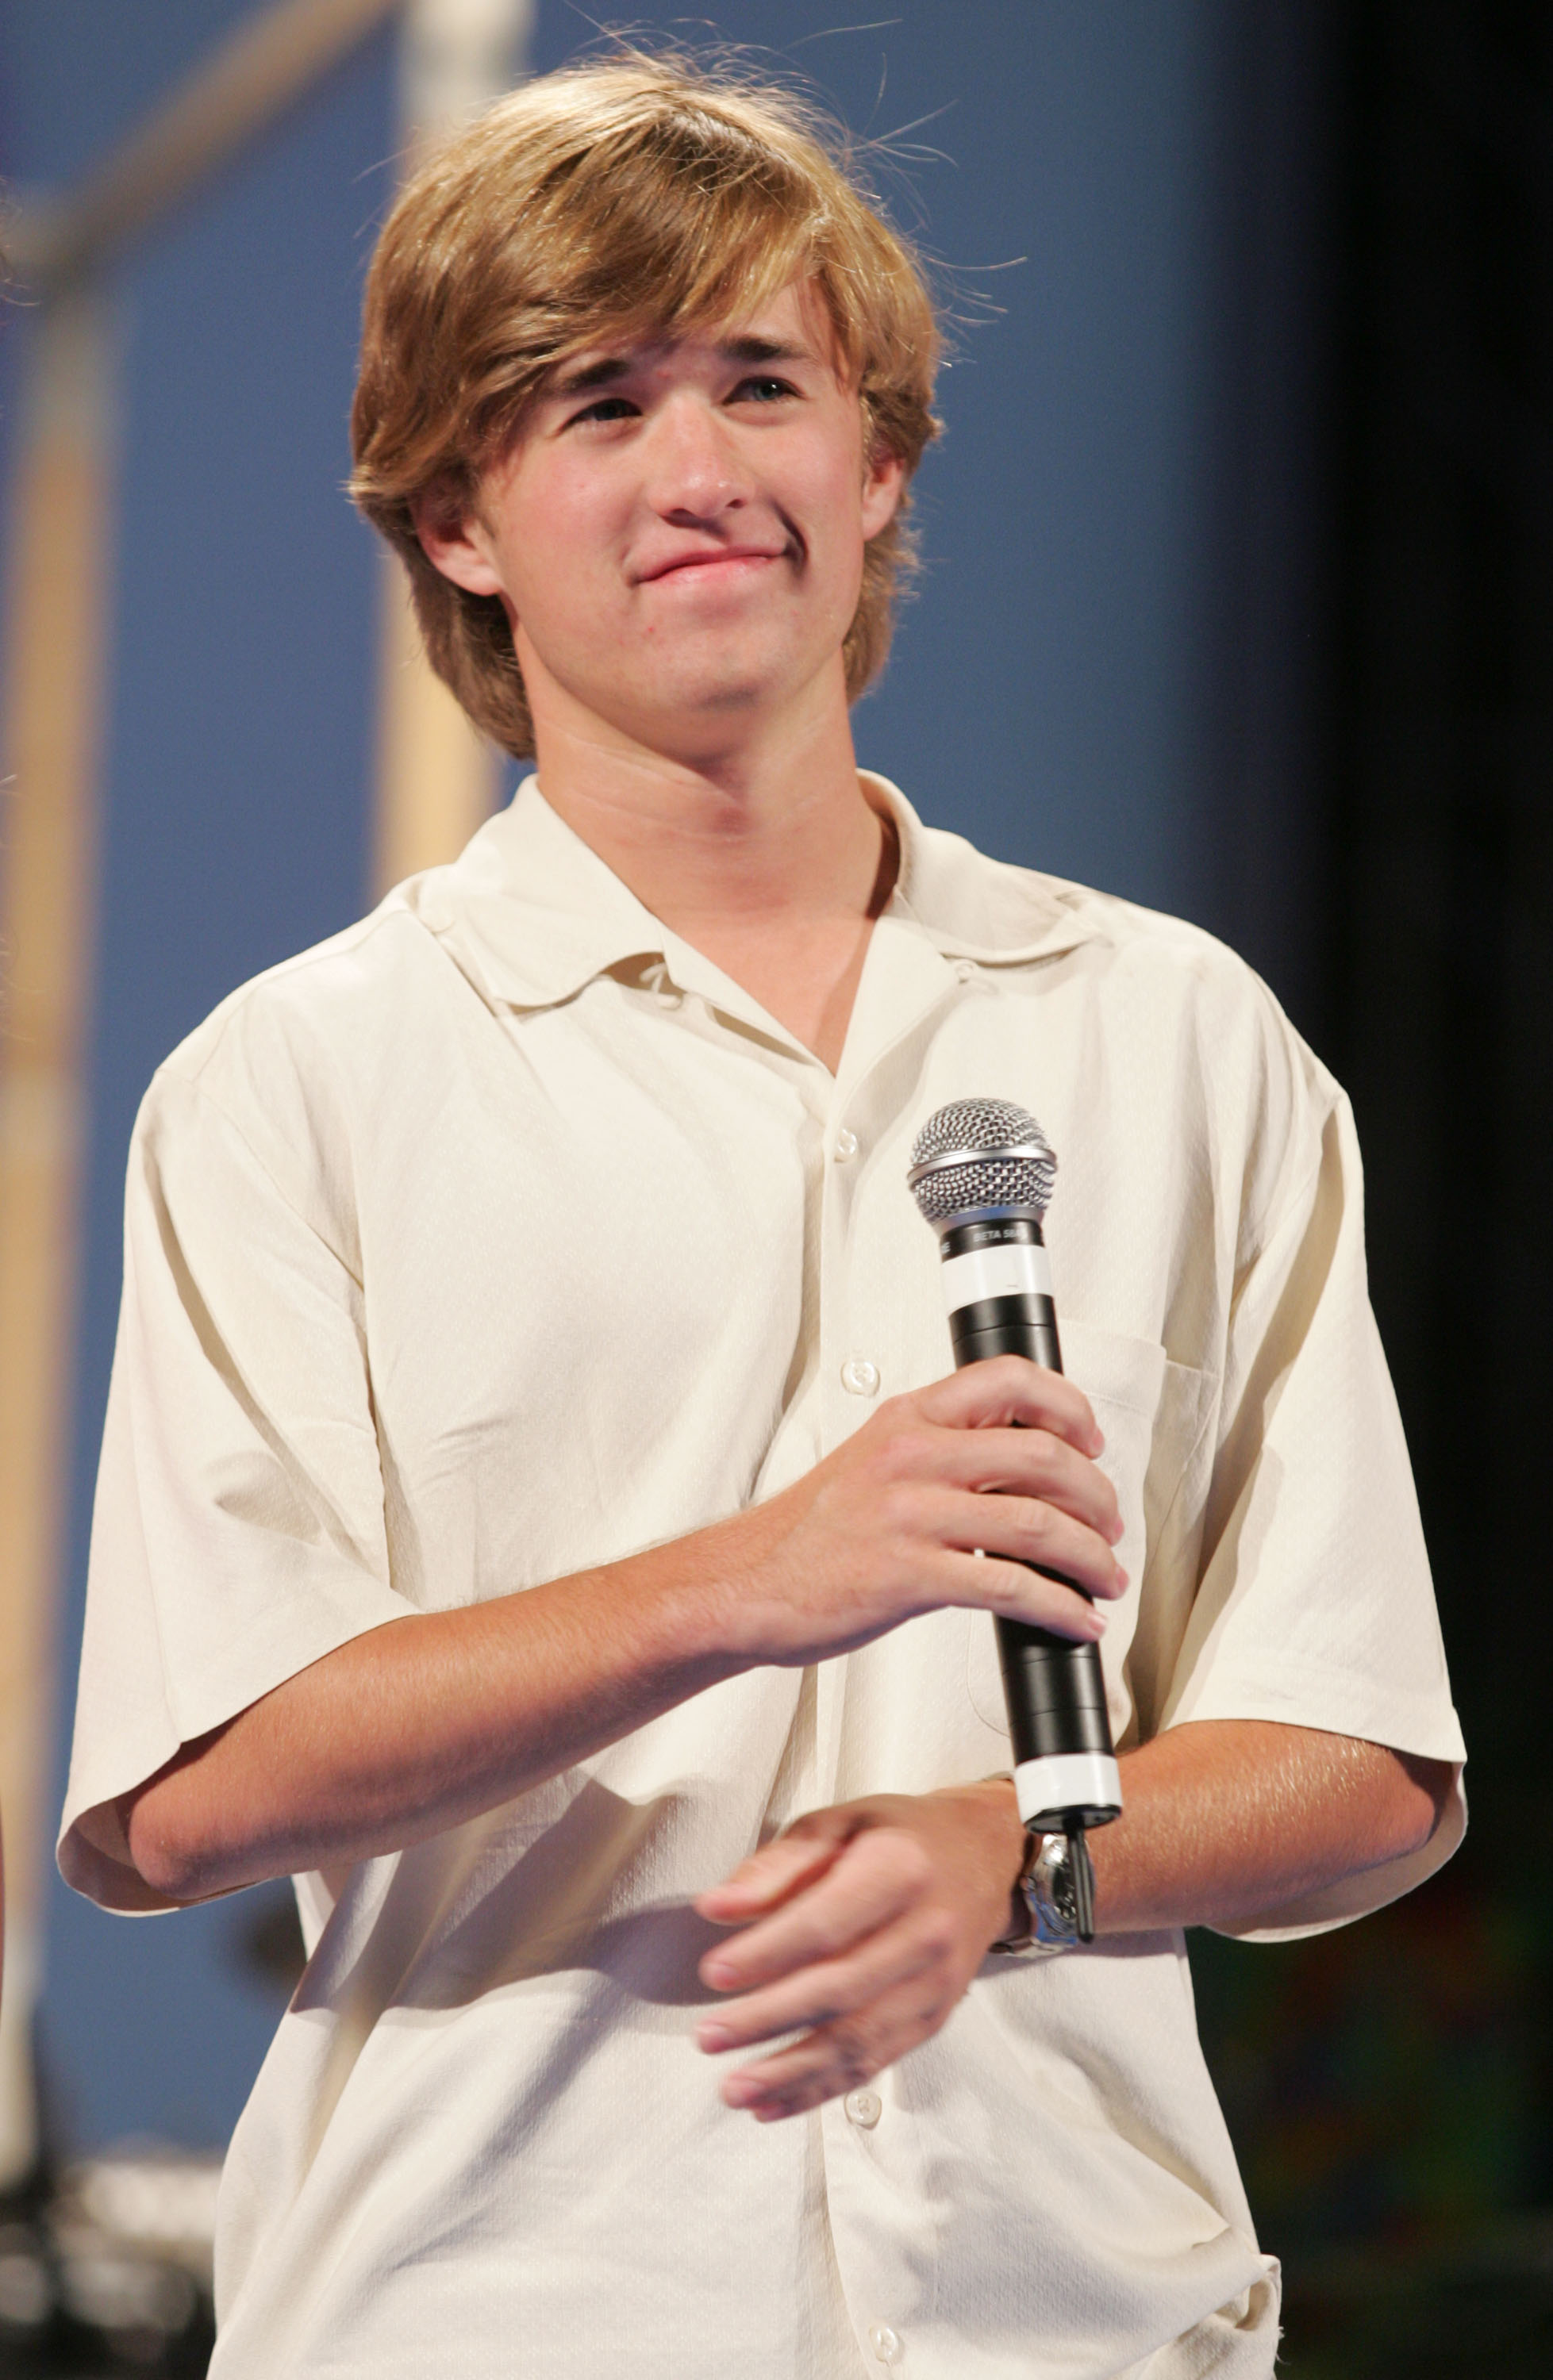 Haley Osment 2005 Giffoni International Children's Film Festival - Haley Joel Osment Tribute at the Alberto Forbi Arena on July 17, 2005 in Giffoni, Italy. | Source: Getty Images